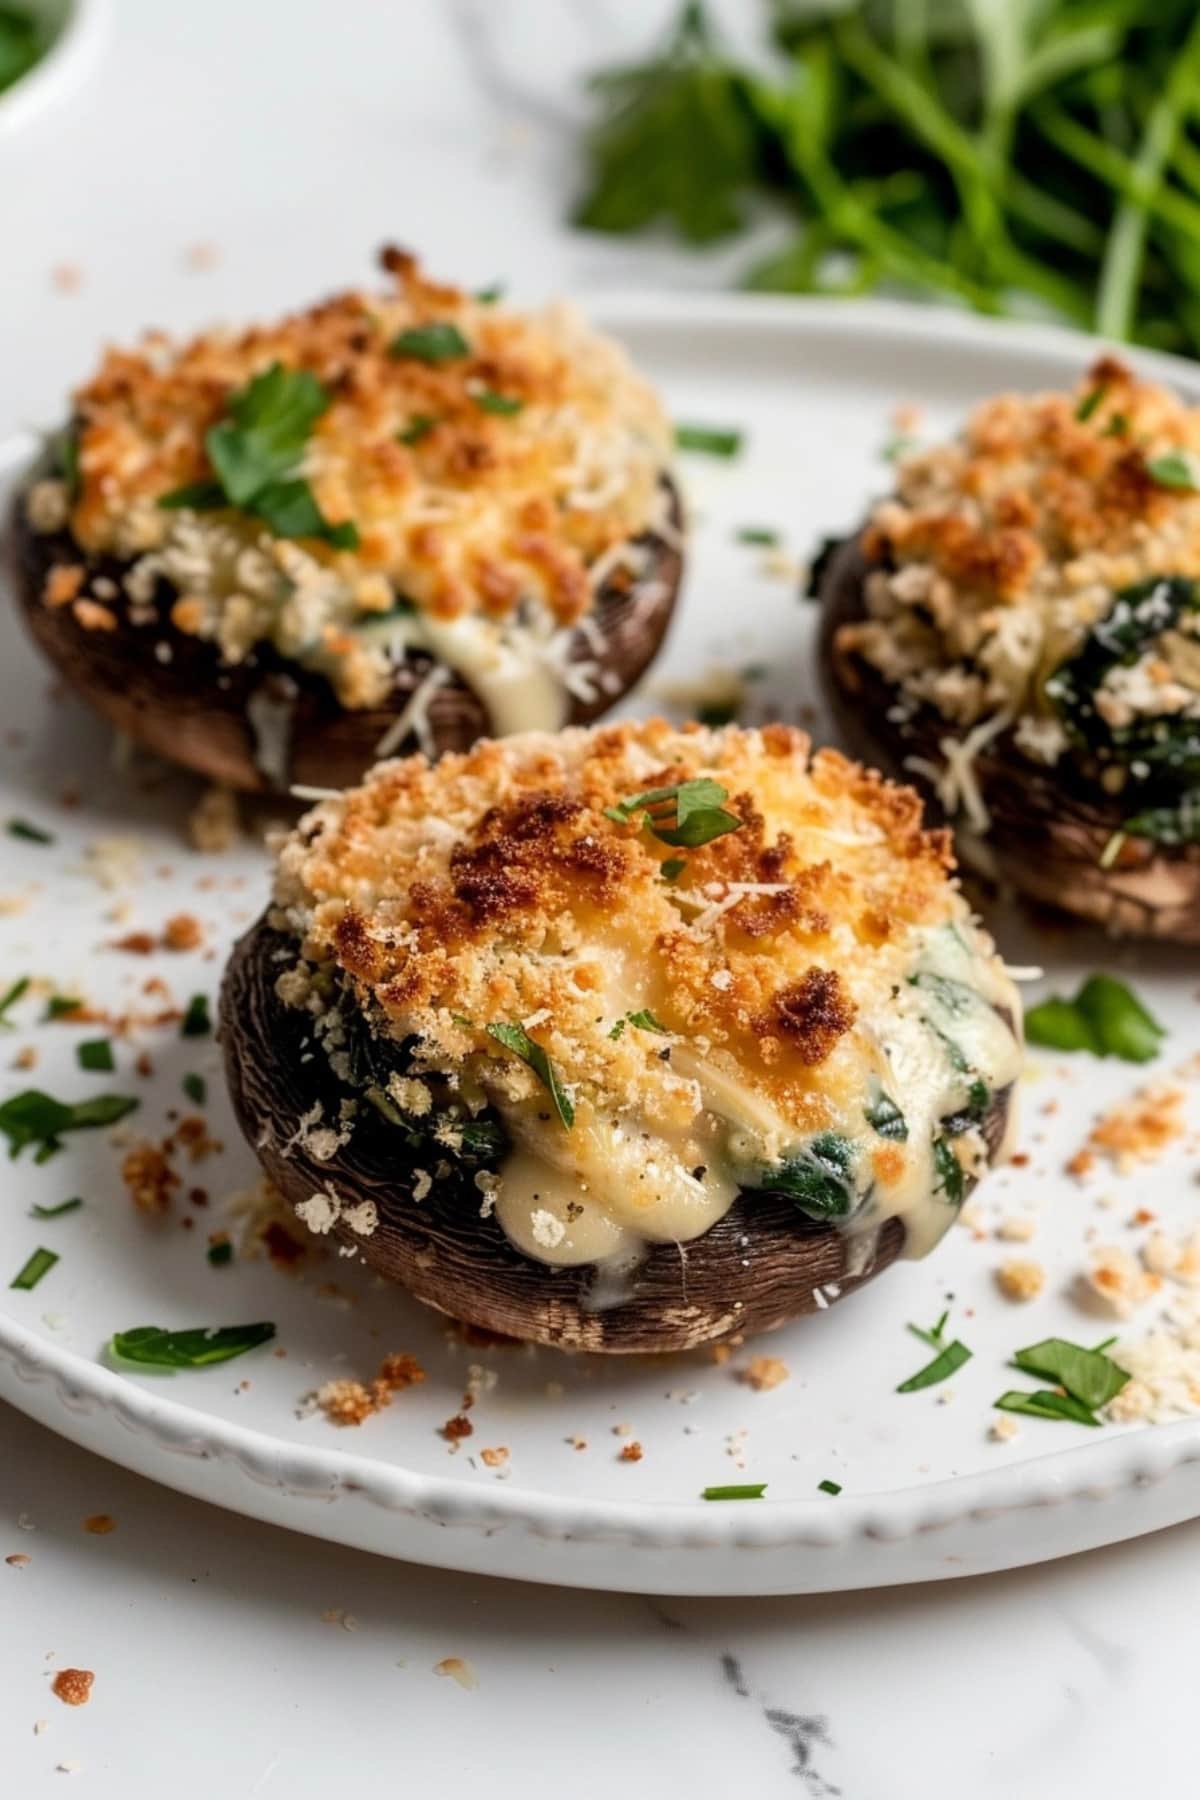 Baked Stuffed Portobello Mushrooms served on a white plate topped with cheese and breadcrumbs garnished with chopped parsley leaves.